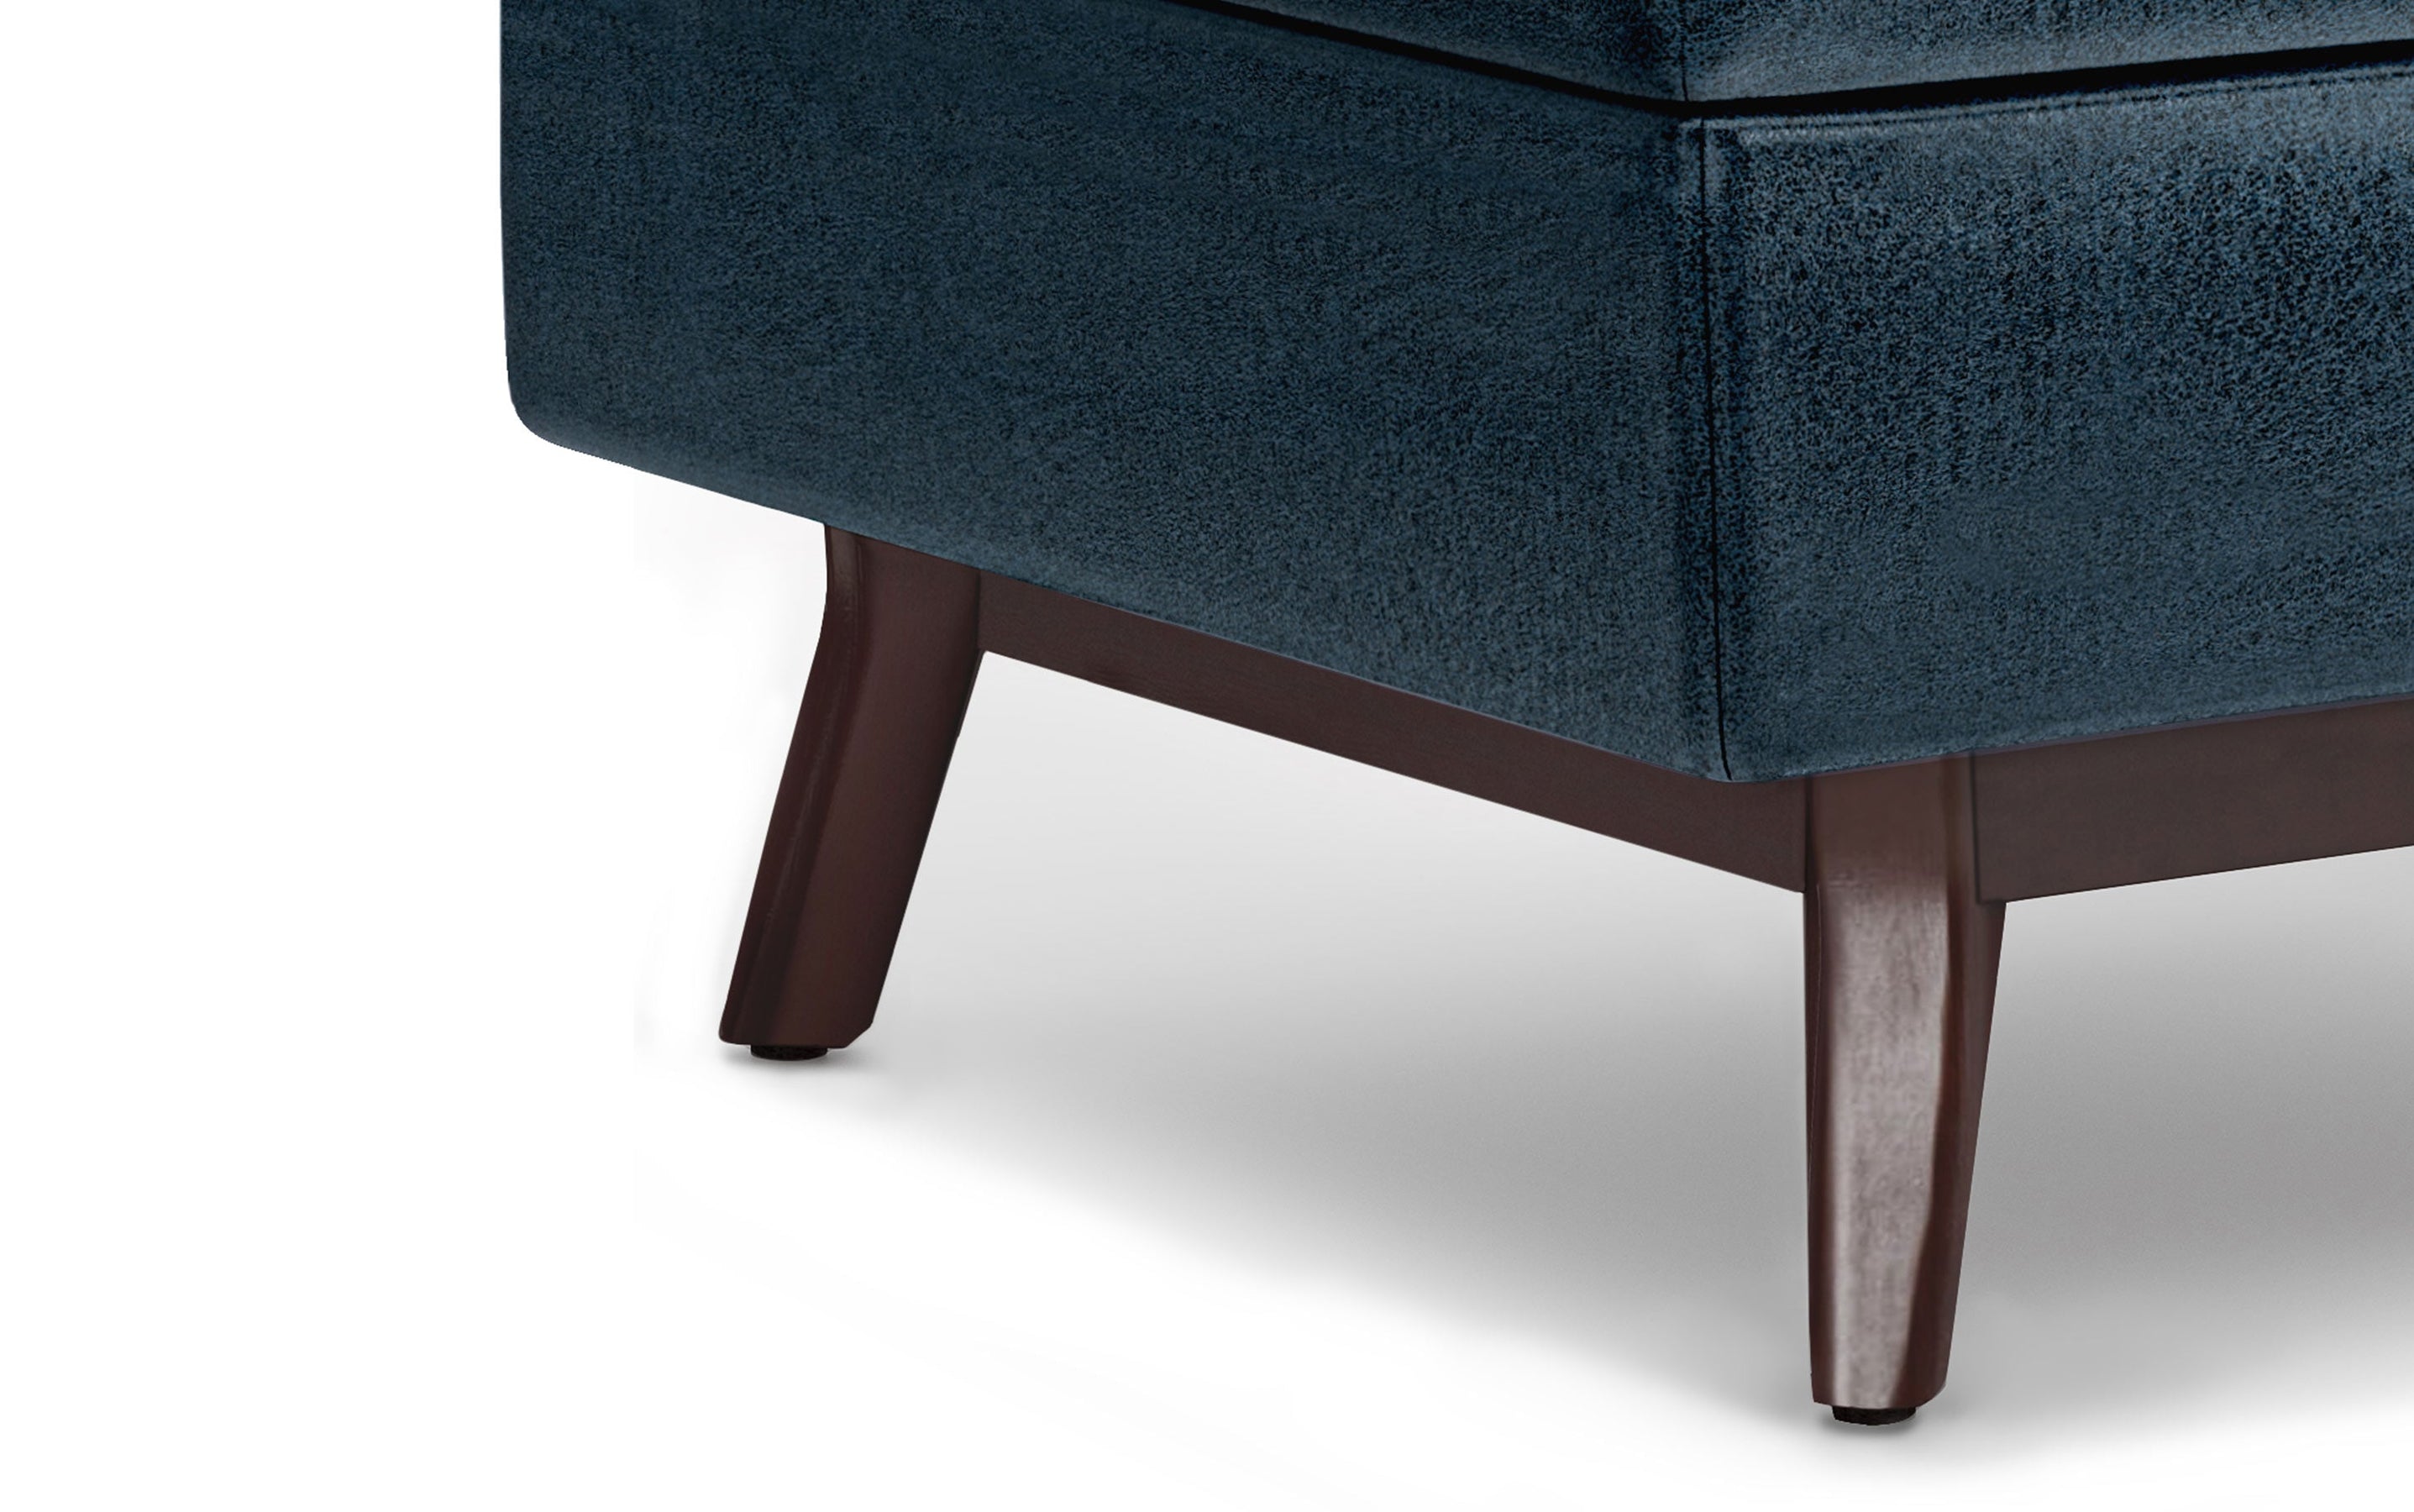 Distressed Dark Blue Distressed Vegan Leather | Owen Small Coffee Table Ottoman in Distressed Vegan Leather